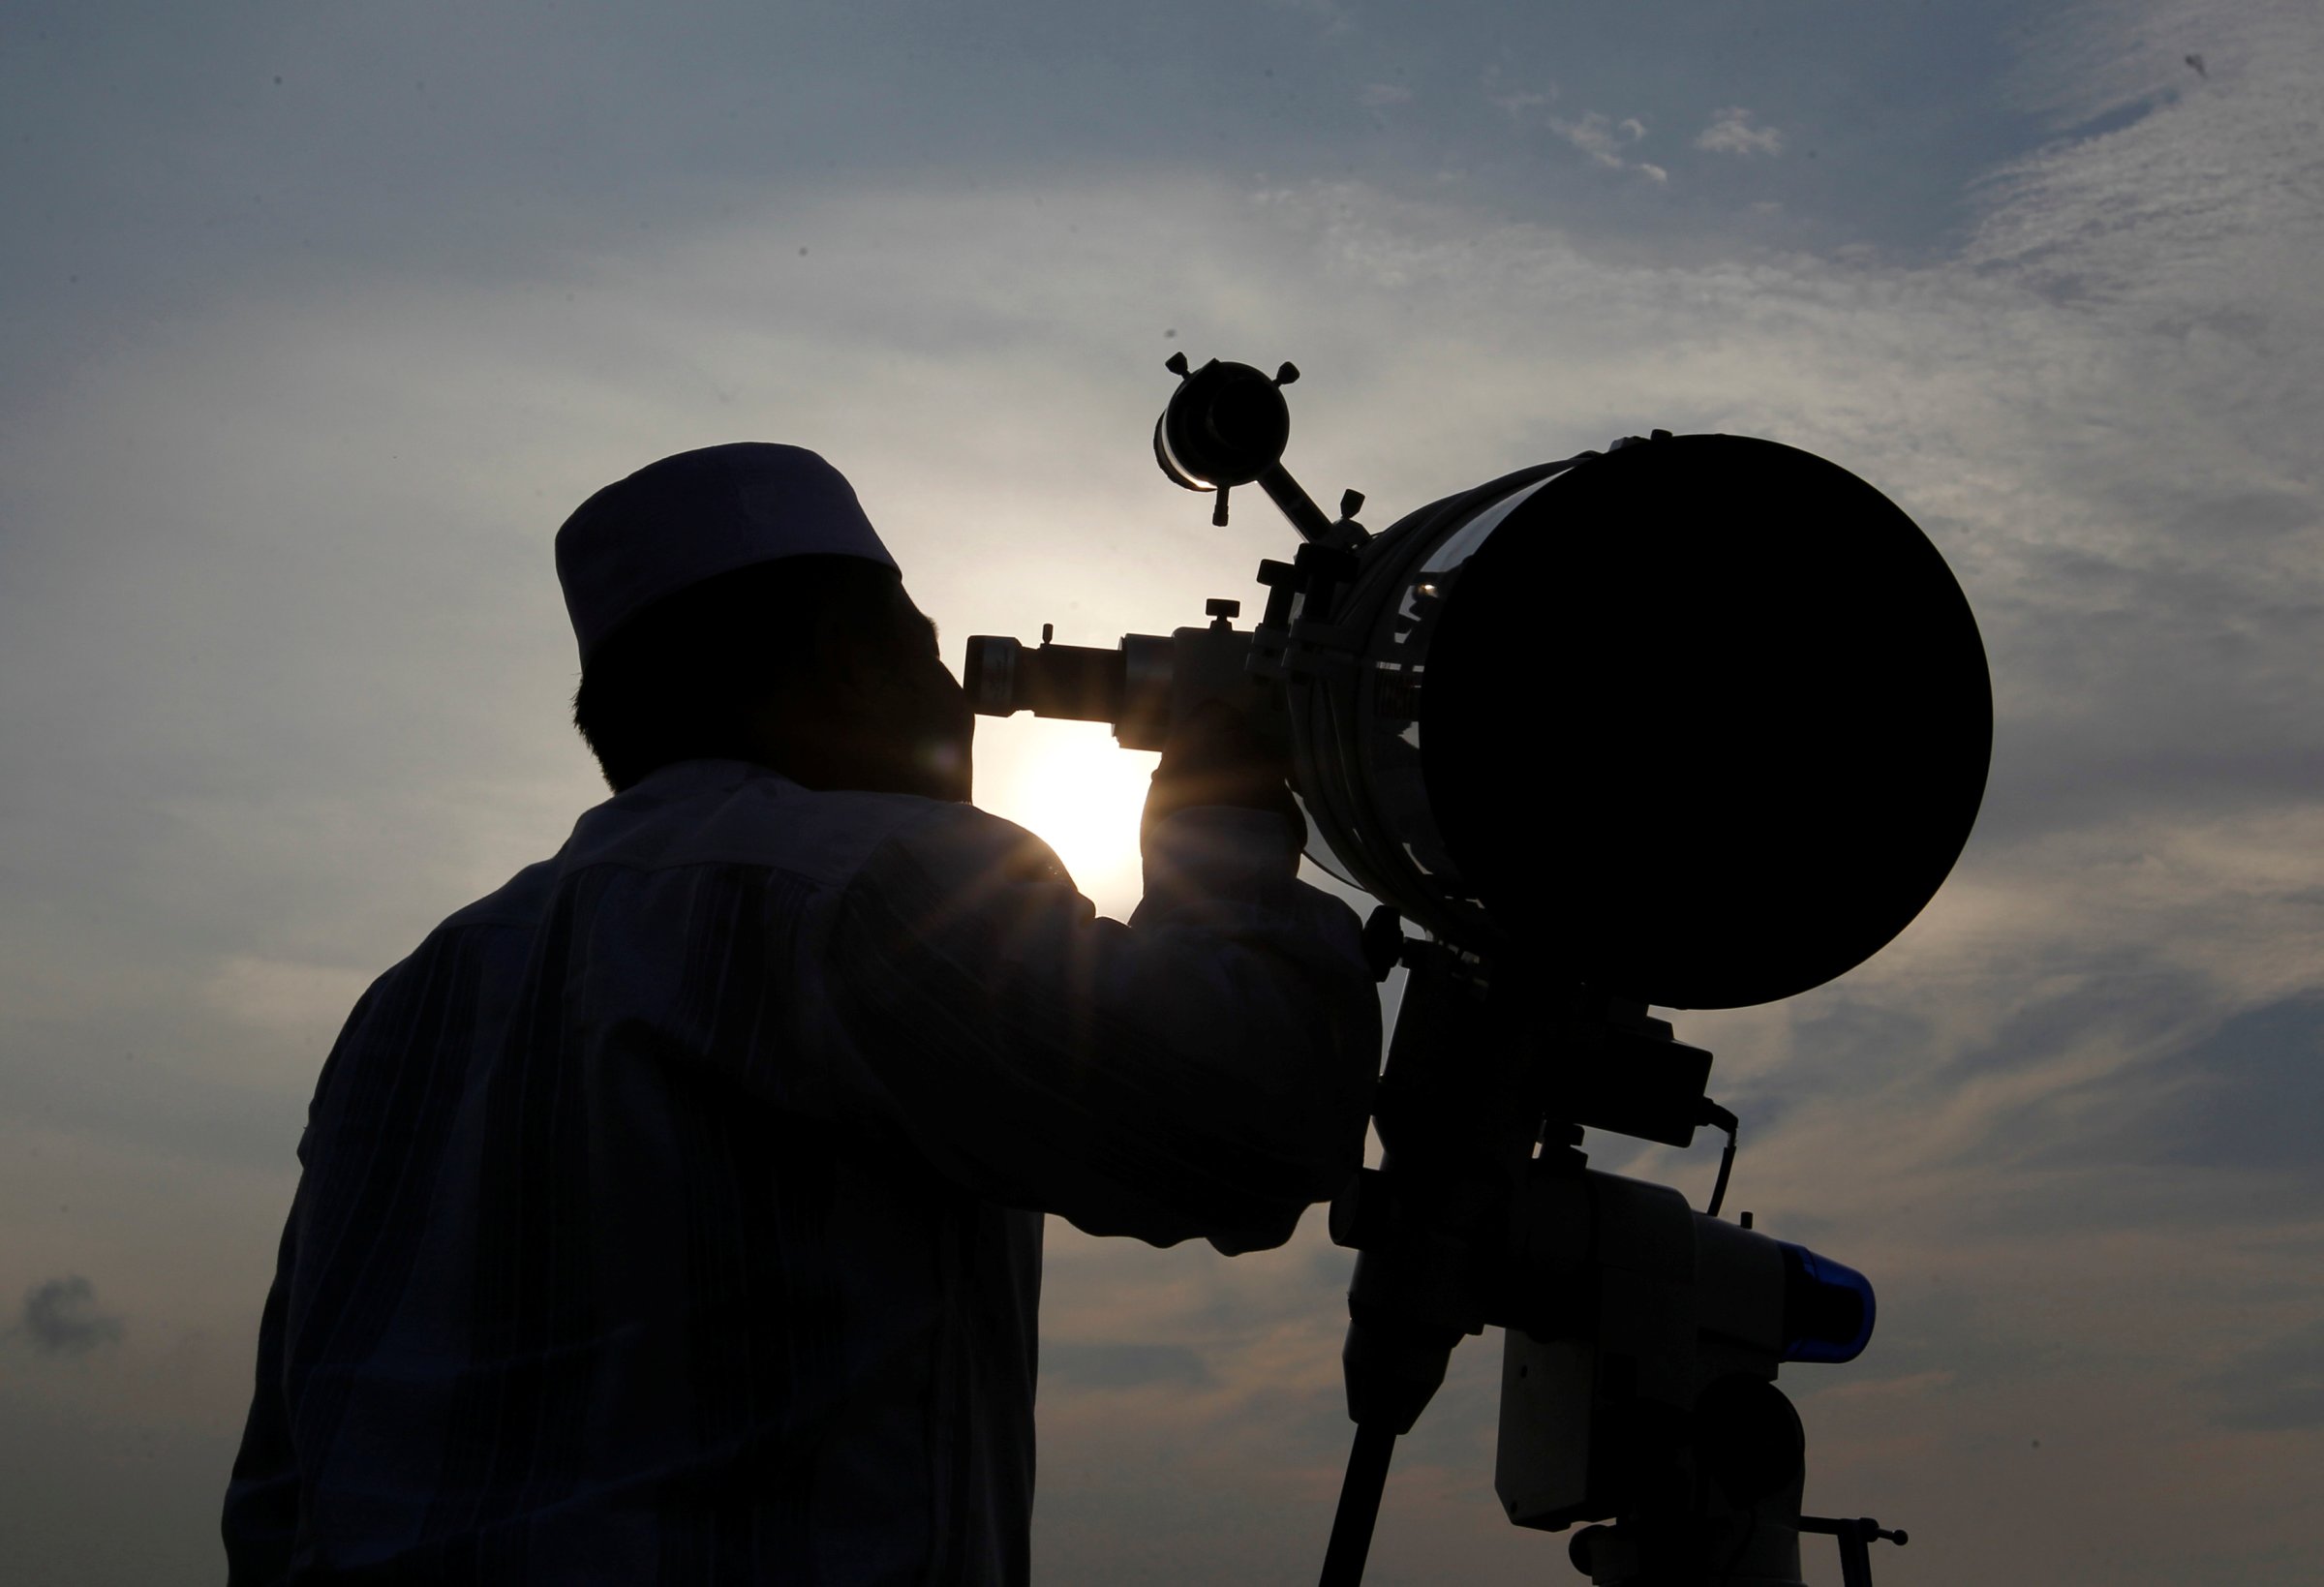 A Muslim man uses a telescope to observe the moon before the Muslim holy month of Ramadan